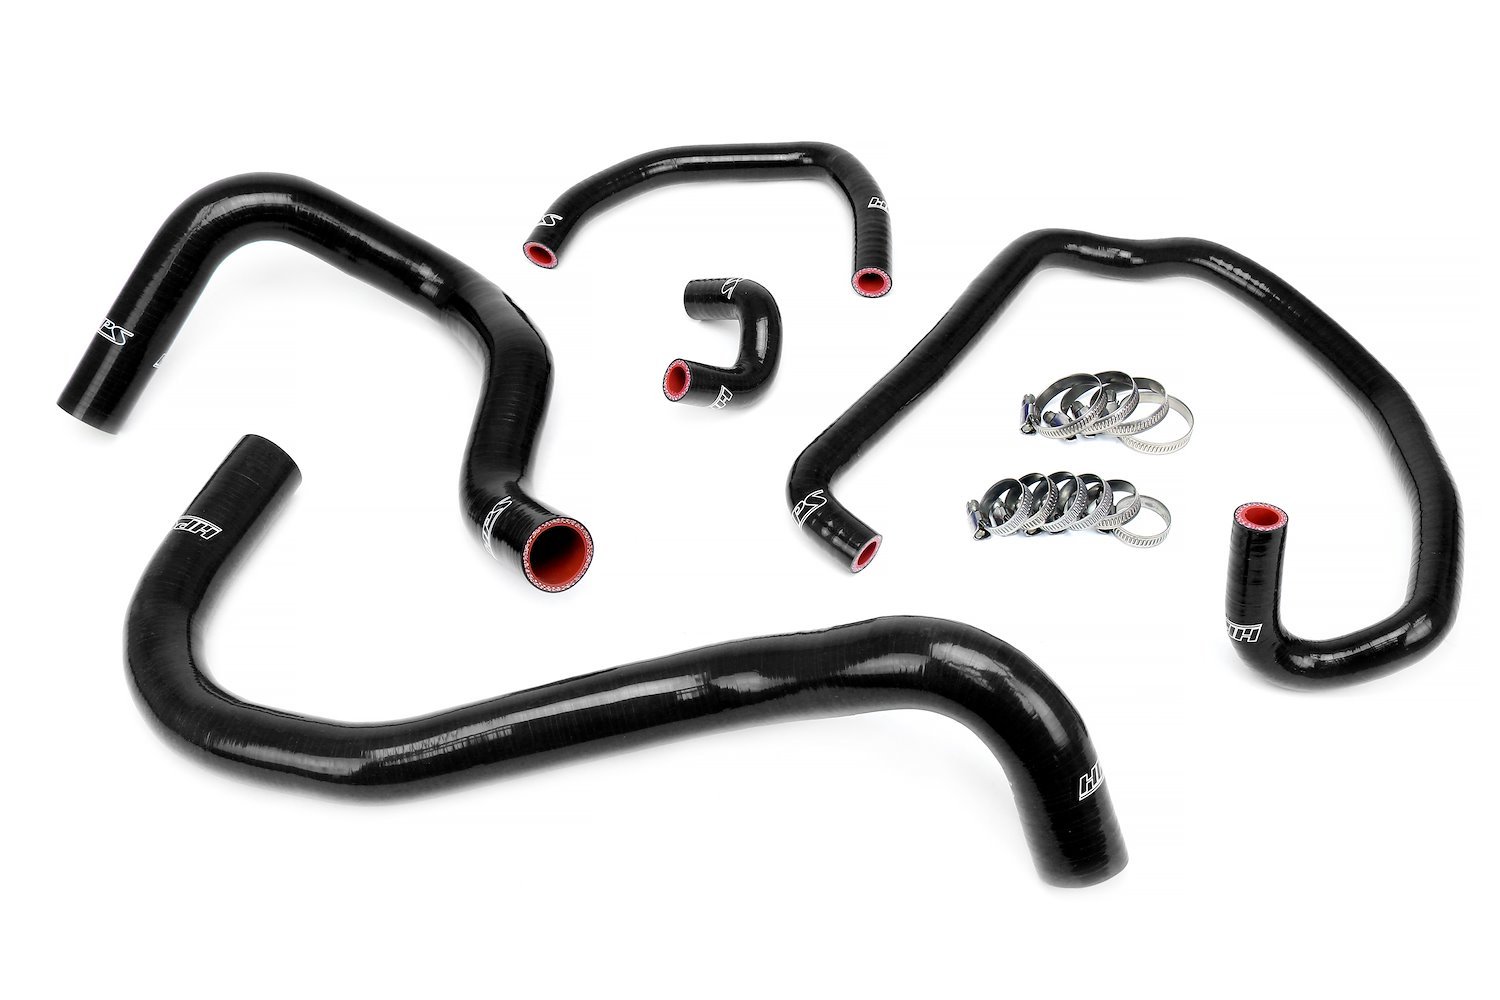 57-1921-BLK Coolant Hose Kit, High-Temp 3-Ply Reinforced Silicone, Replaces OEM Radiator & Heater Hoses